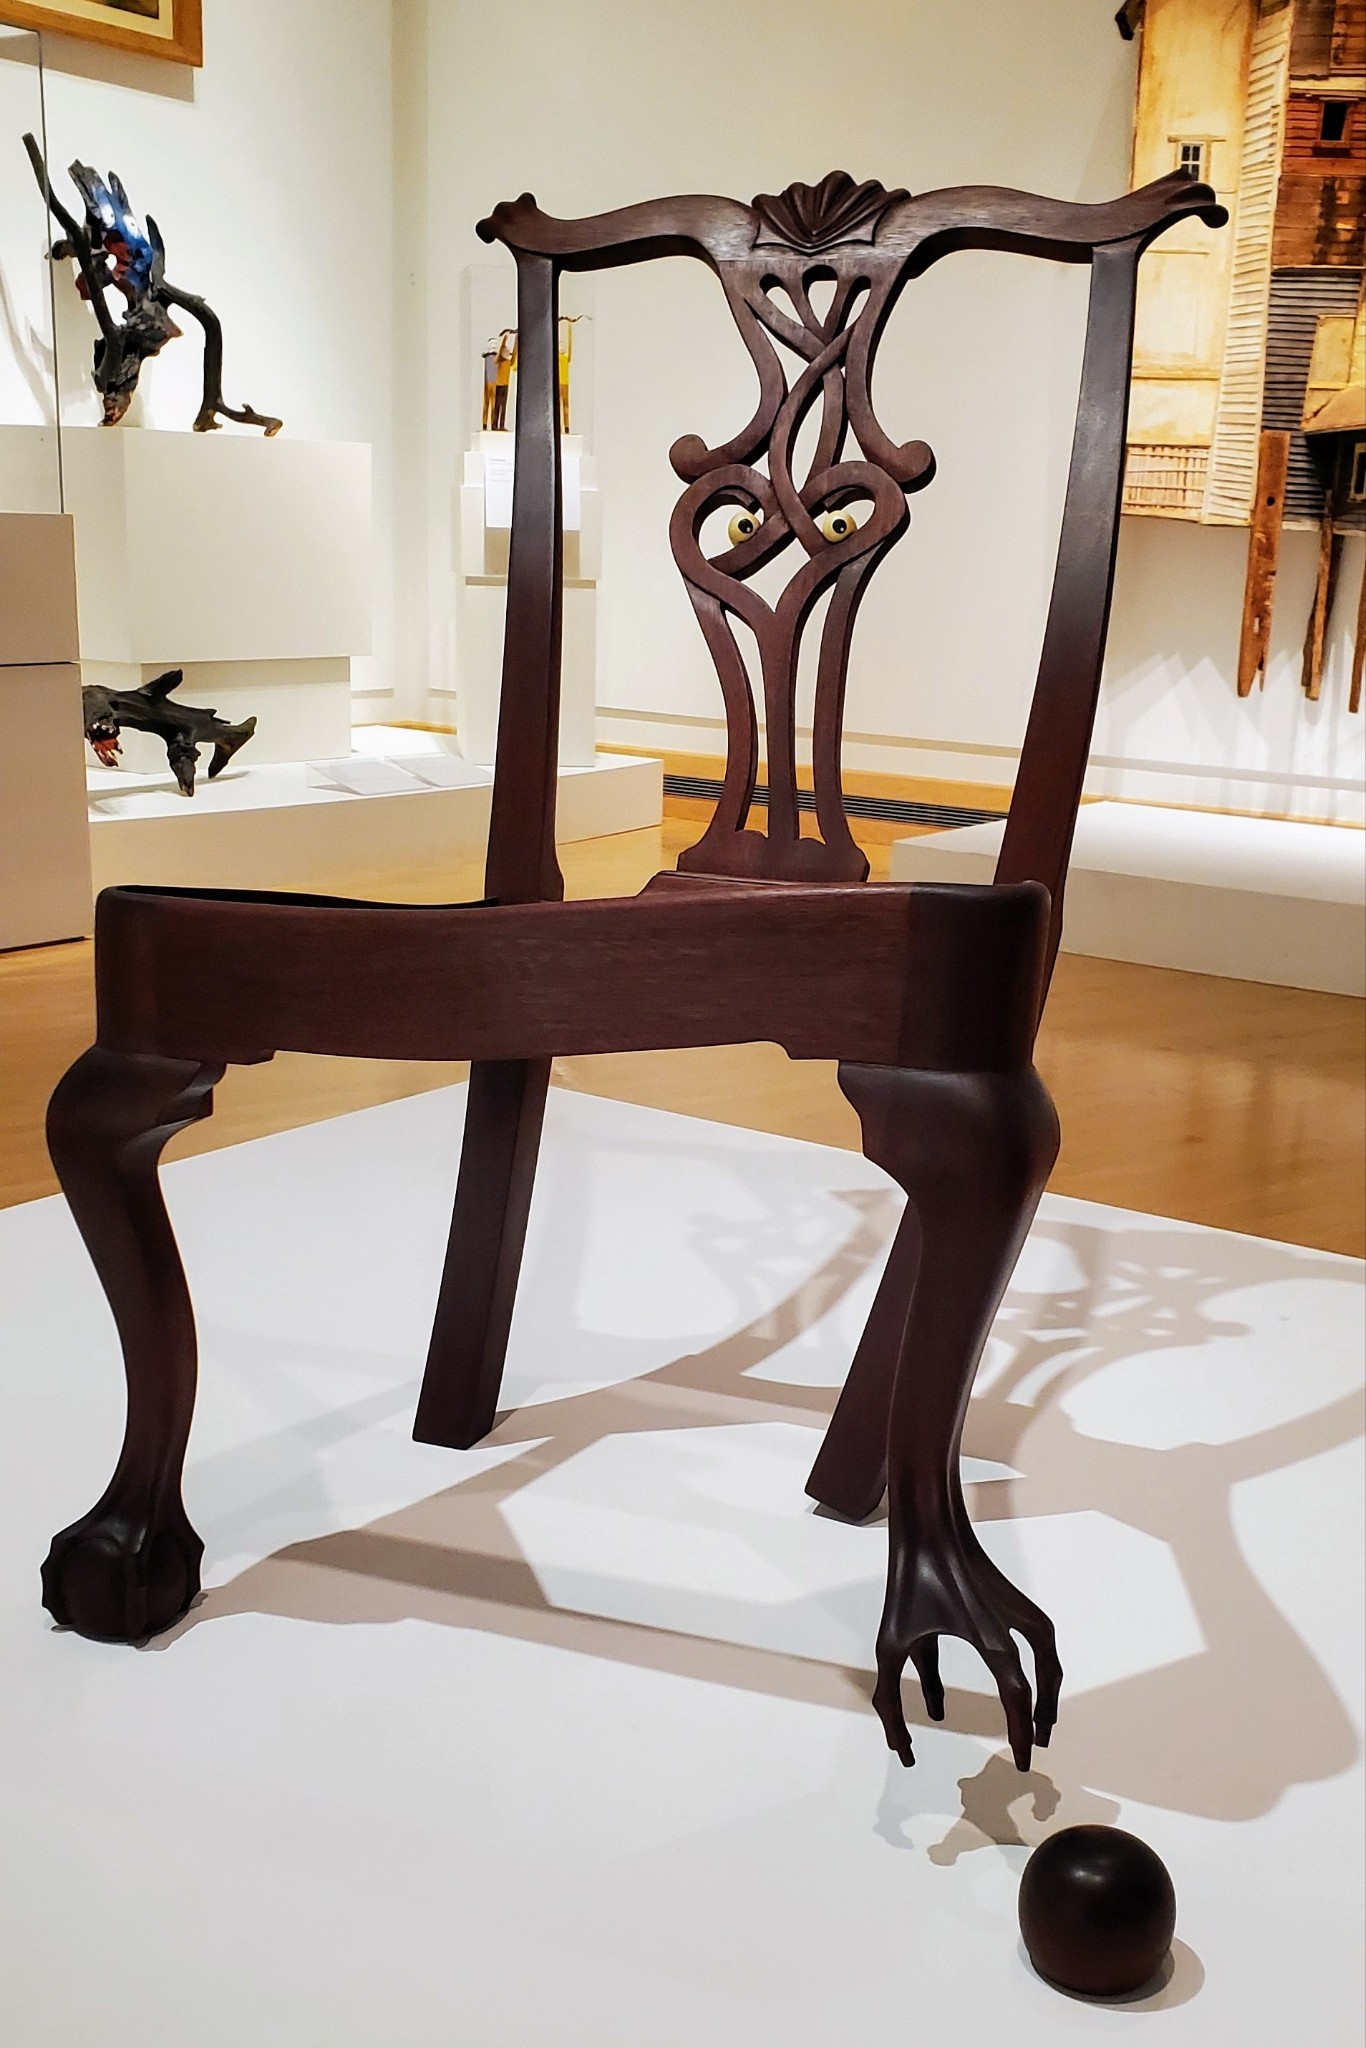 oneiriad:  followthebluebell:msmargaretmurry:  followthebluebell:i think furniture legs should be carved into little animal feet again.  i think that would solve a lot of problems.     this post made me think of this amazing cursèd chair i saw at the